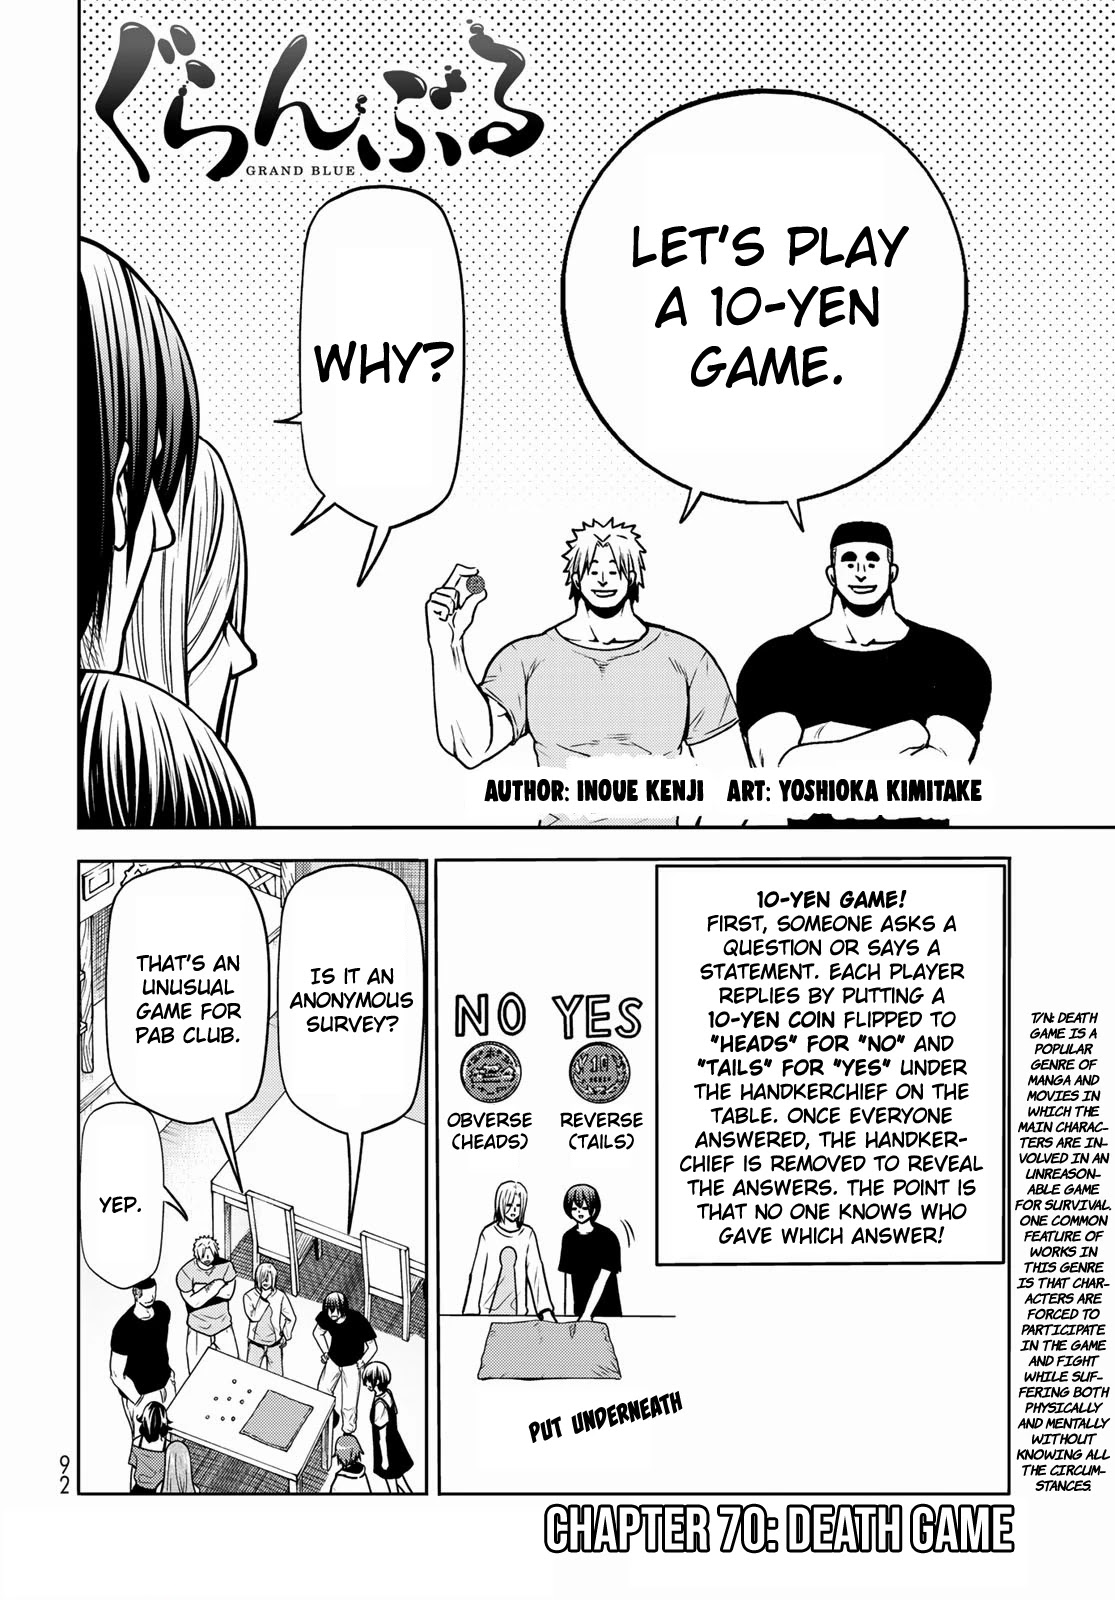 Grand Blue - Page 2